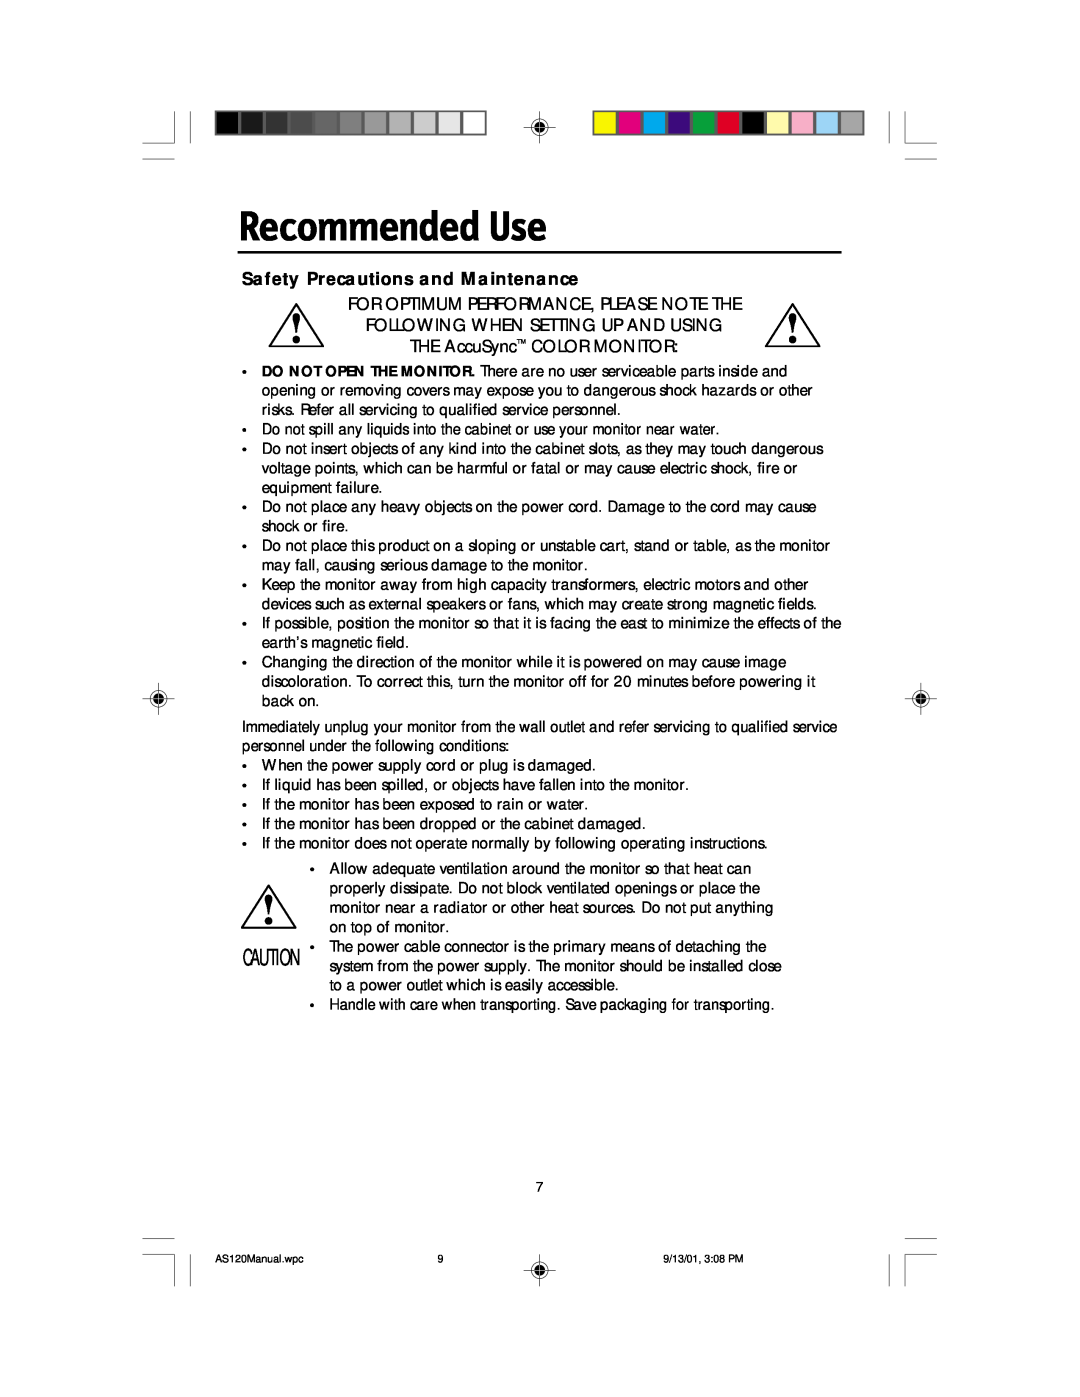 NEC AccuSync 120 user manual Recommended Use, Safety Precautions and Maintenance 